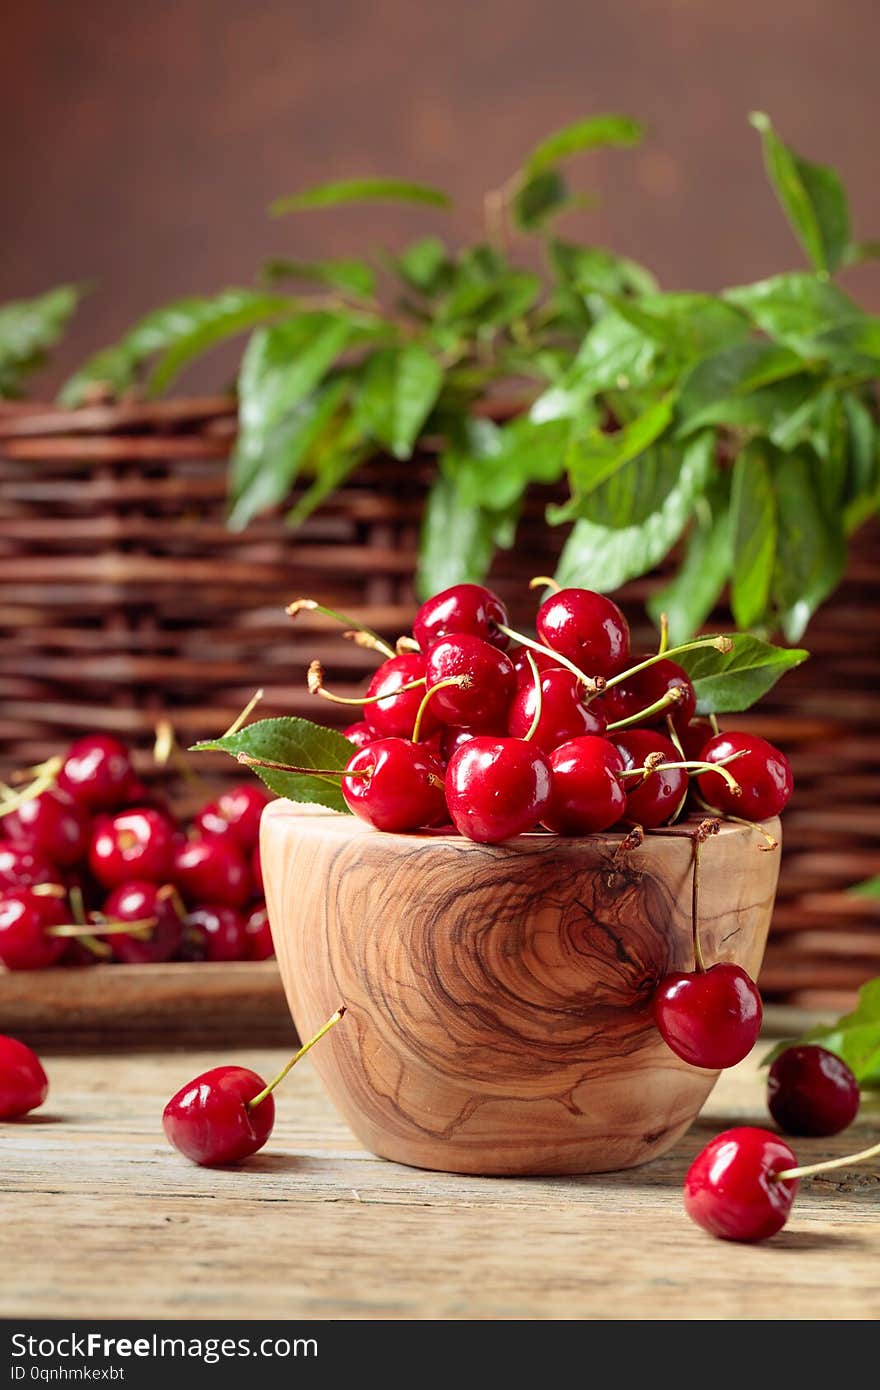 Red sweet cherry in a wooden bowl on a wooden table in garden. Wicker fence with green leaves in the background